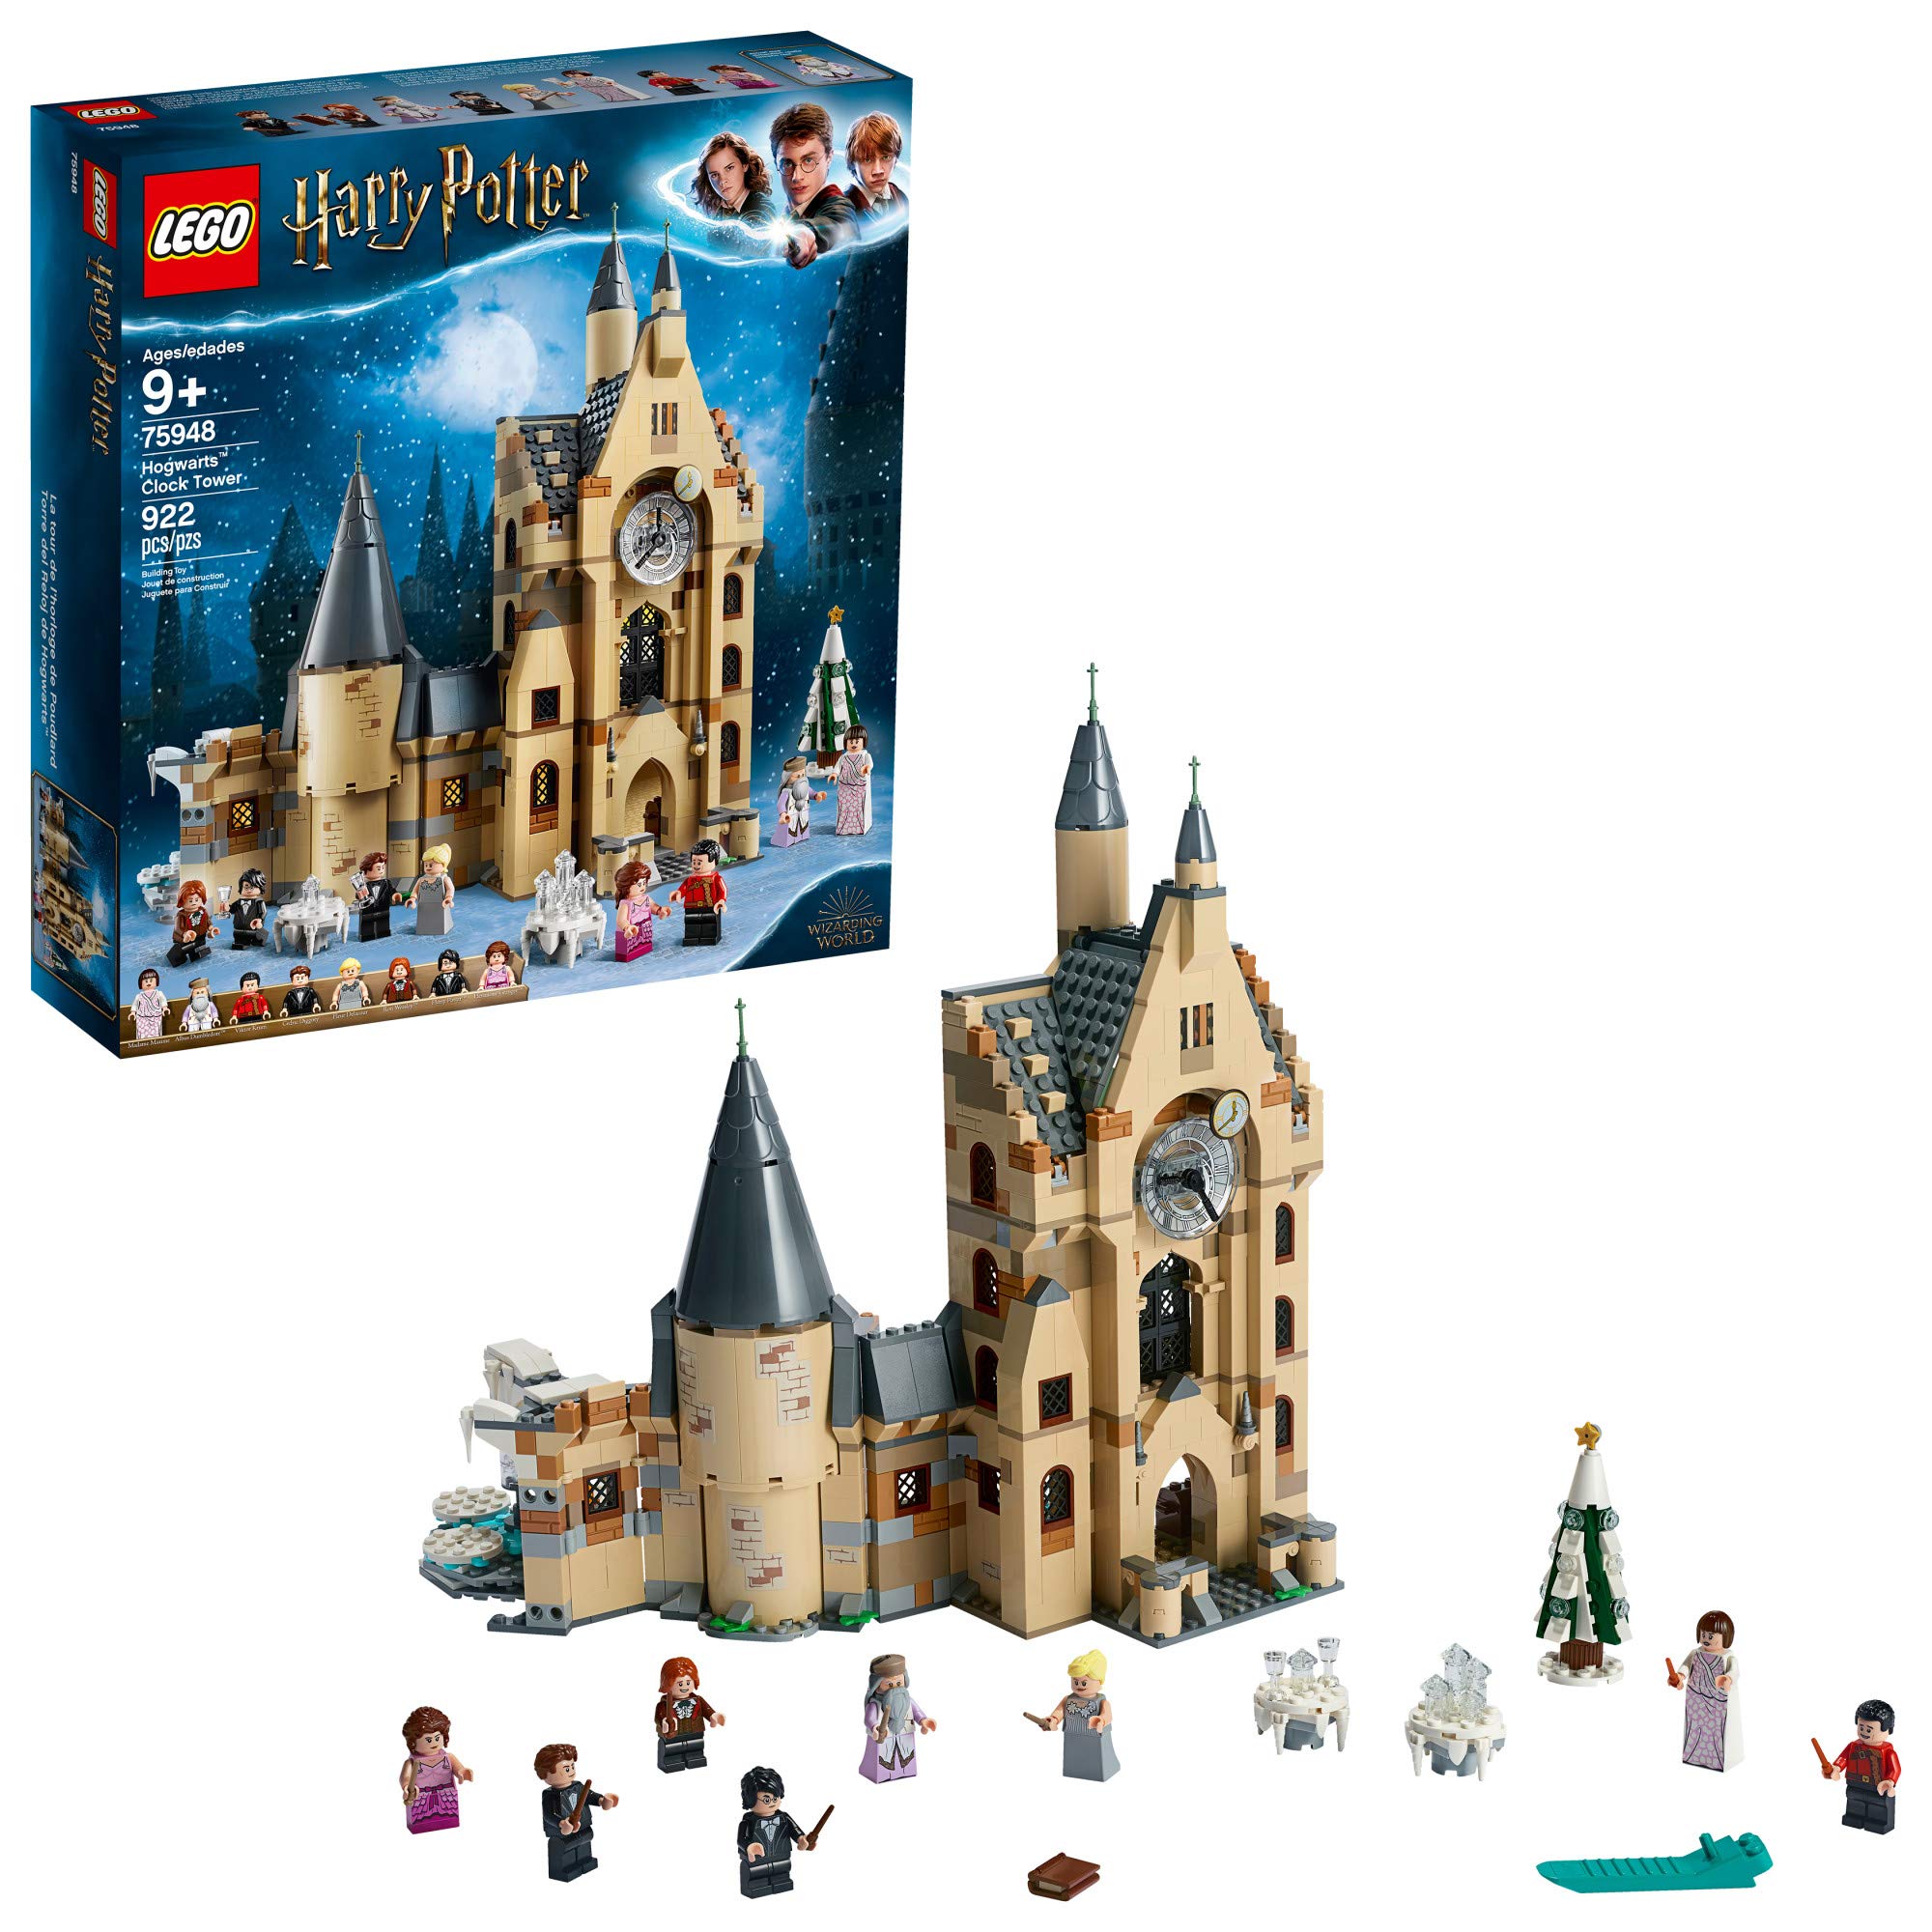 LEGO Harry Potter Hogwarts Clock Tower 75948 Build and Play Tower Set with Harry Potter Minifigures, Popular Harry Potter Gift and Playset with Ron Weasley, Hermione Granger and more (922 Pieces)